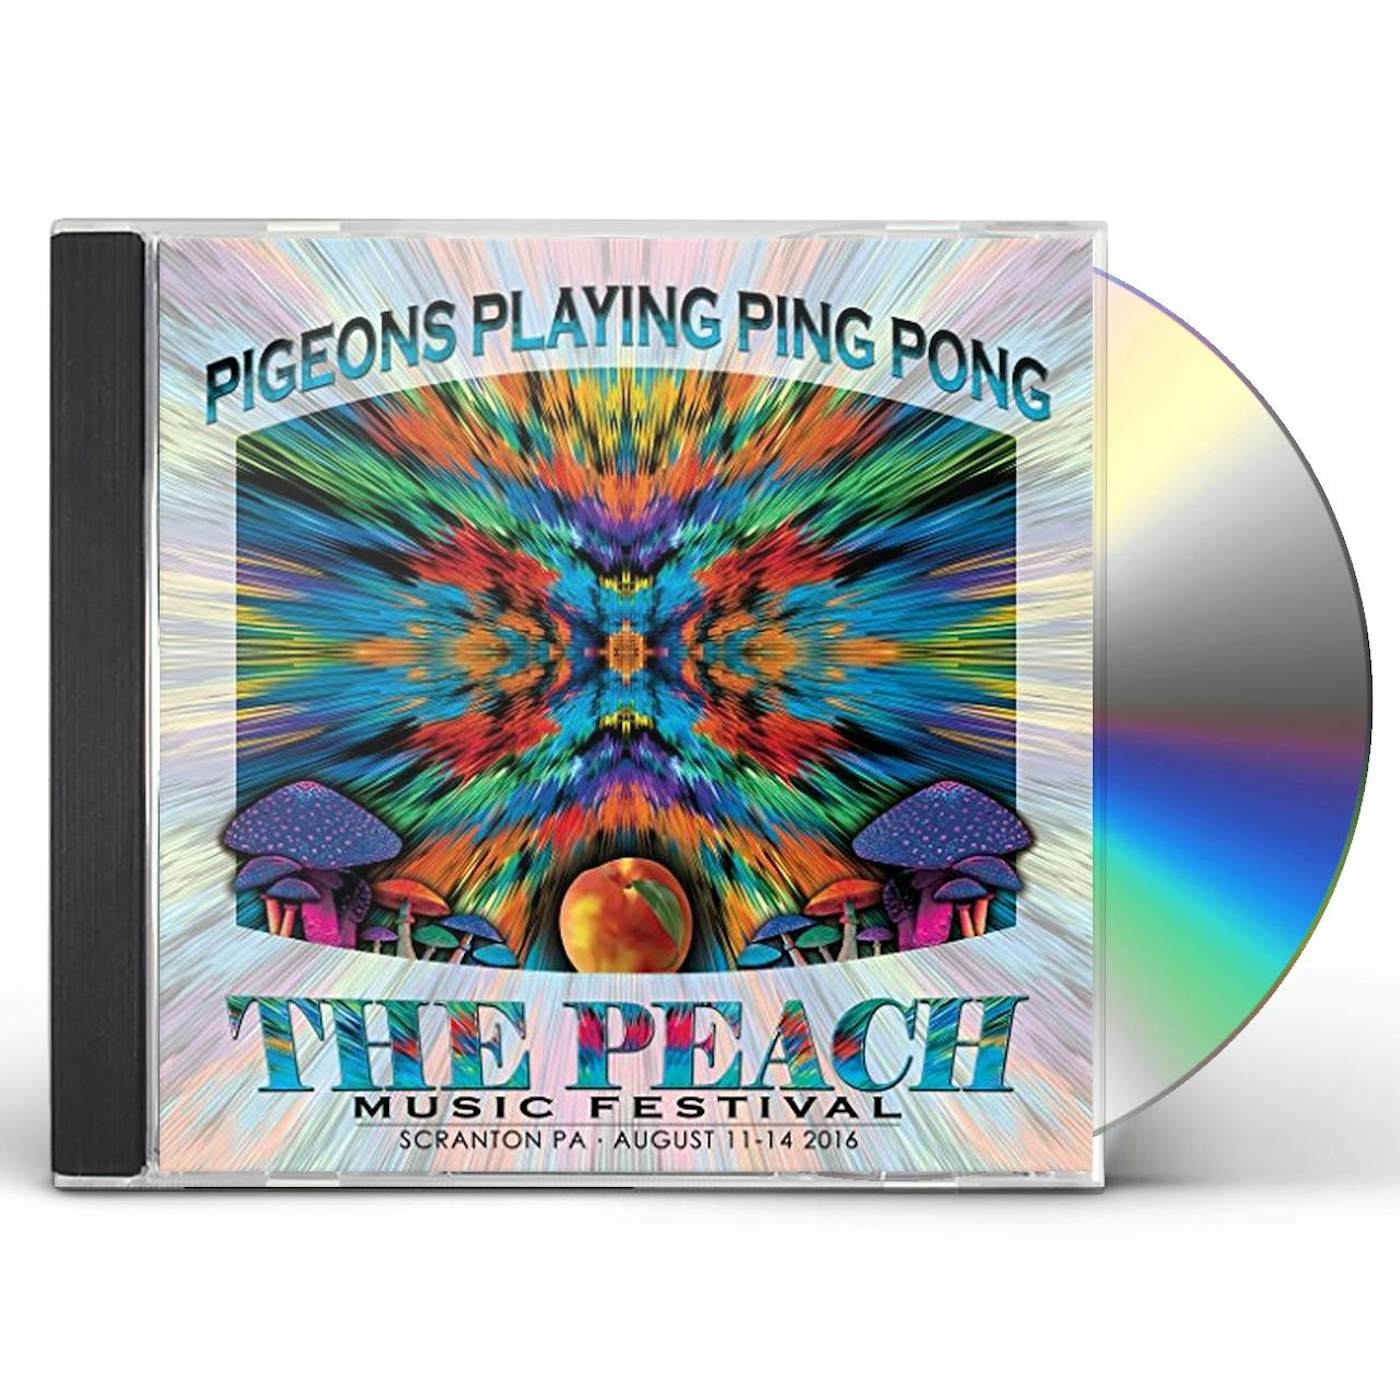 Pigeons Playing Ping Pong PEACH MUSIC FESTIVAL 2016 CD